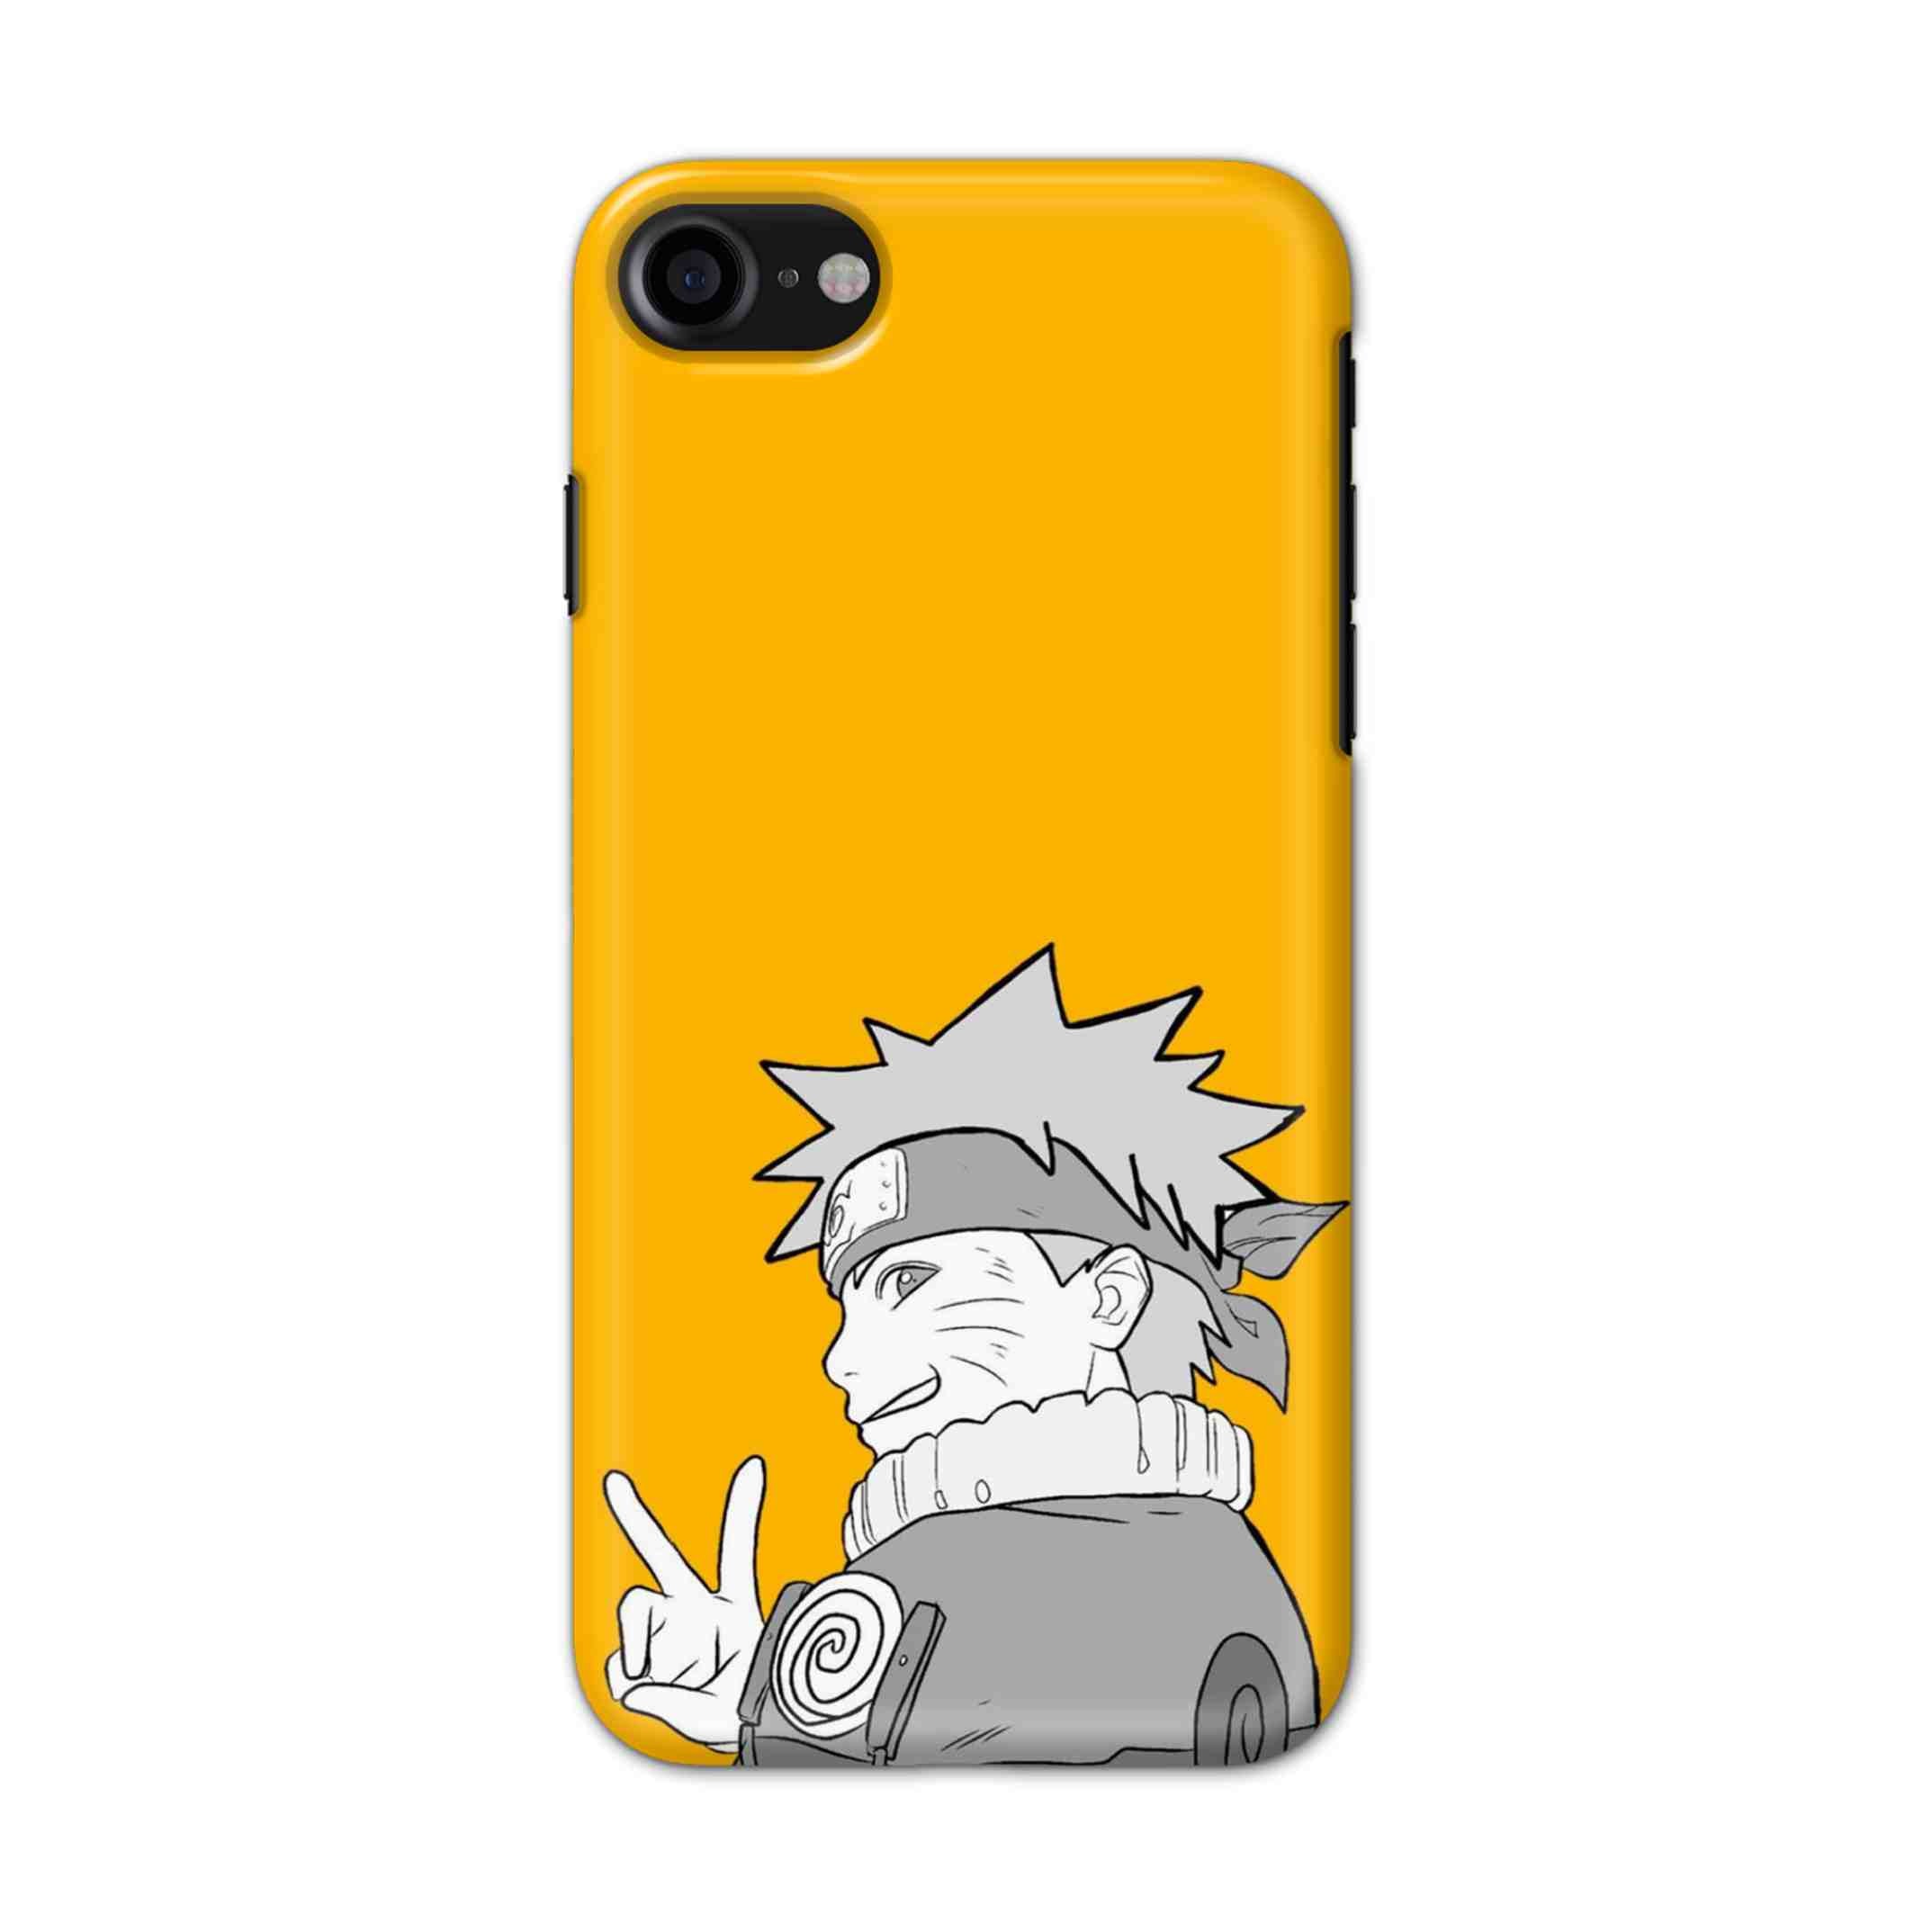 Buy White Naruto Hard Back Mobile Phone Case/Cover For iPhone 7 / 8 Online